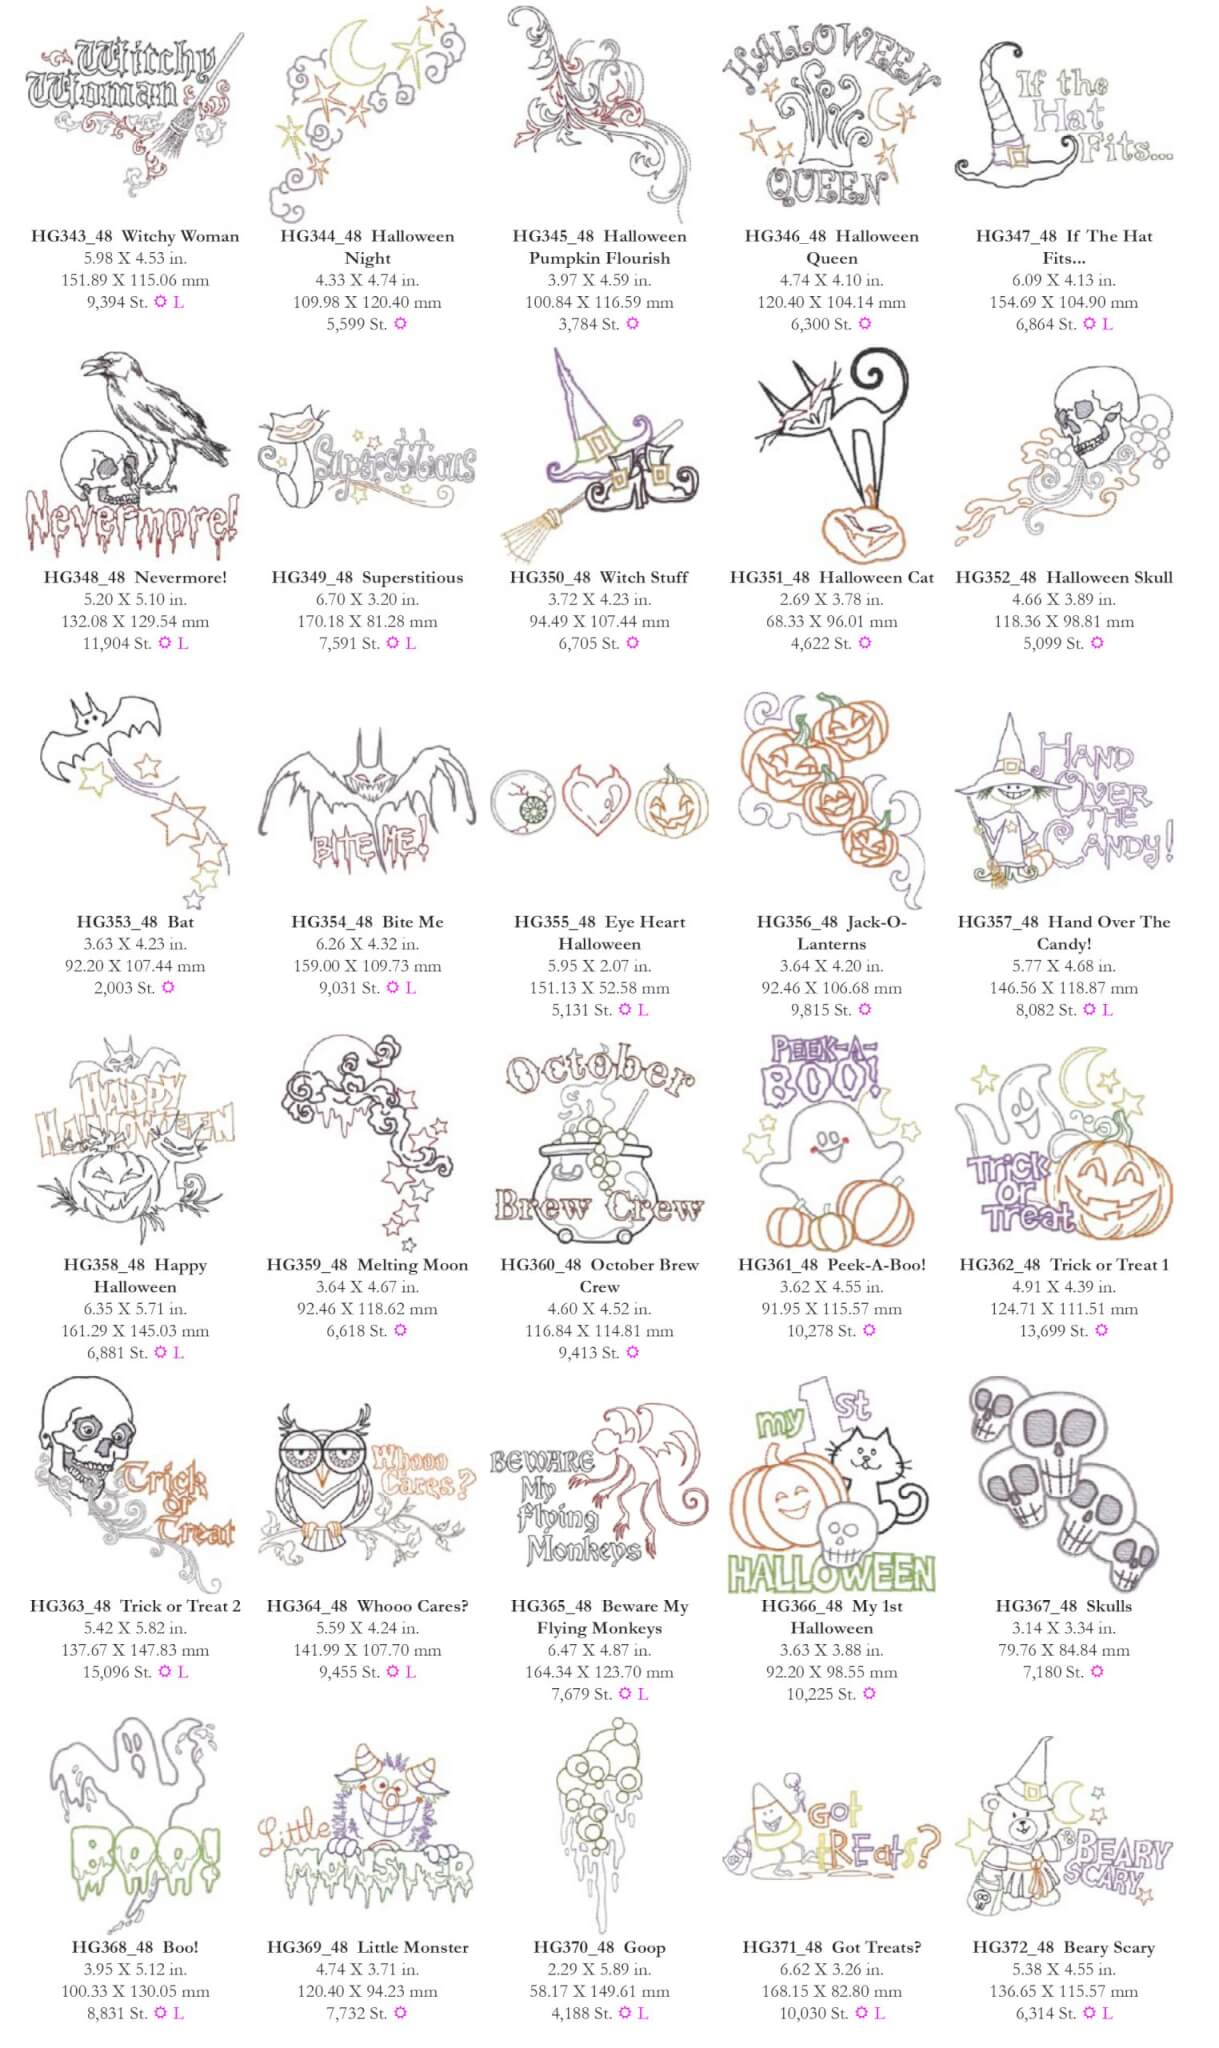 OESD #12267 Halloween Sayings Embroidery Designs Collection available at Nancy Zieman Productions at ShopNZP.com